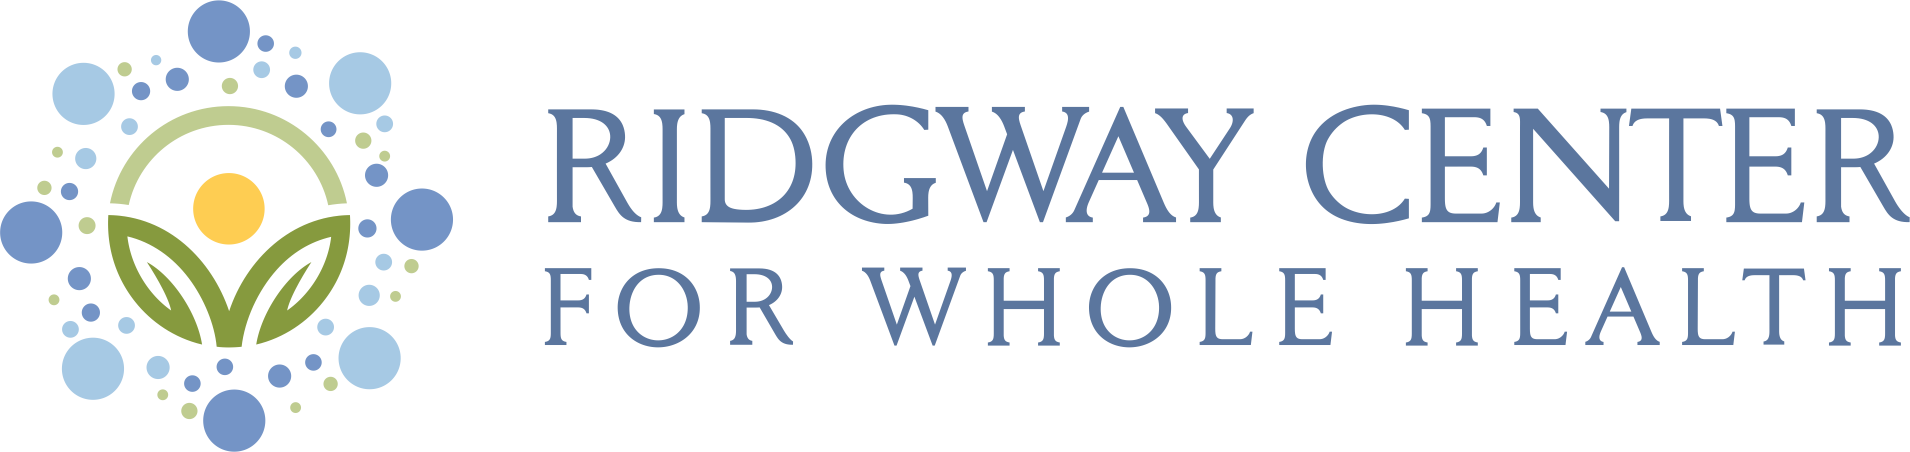 Ridgway Center for Whole Health